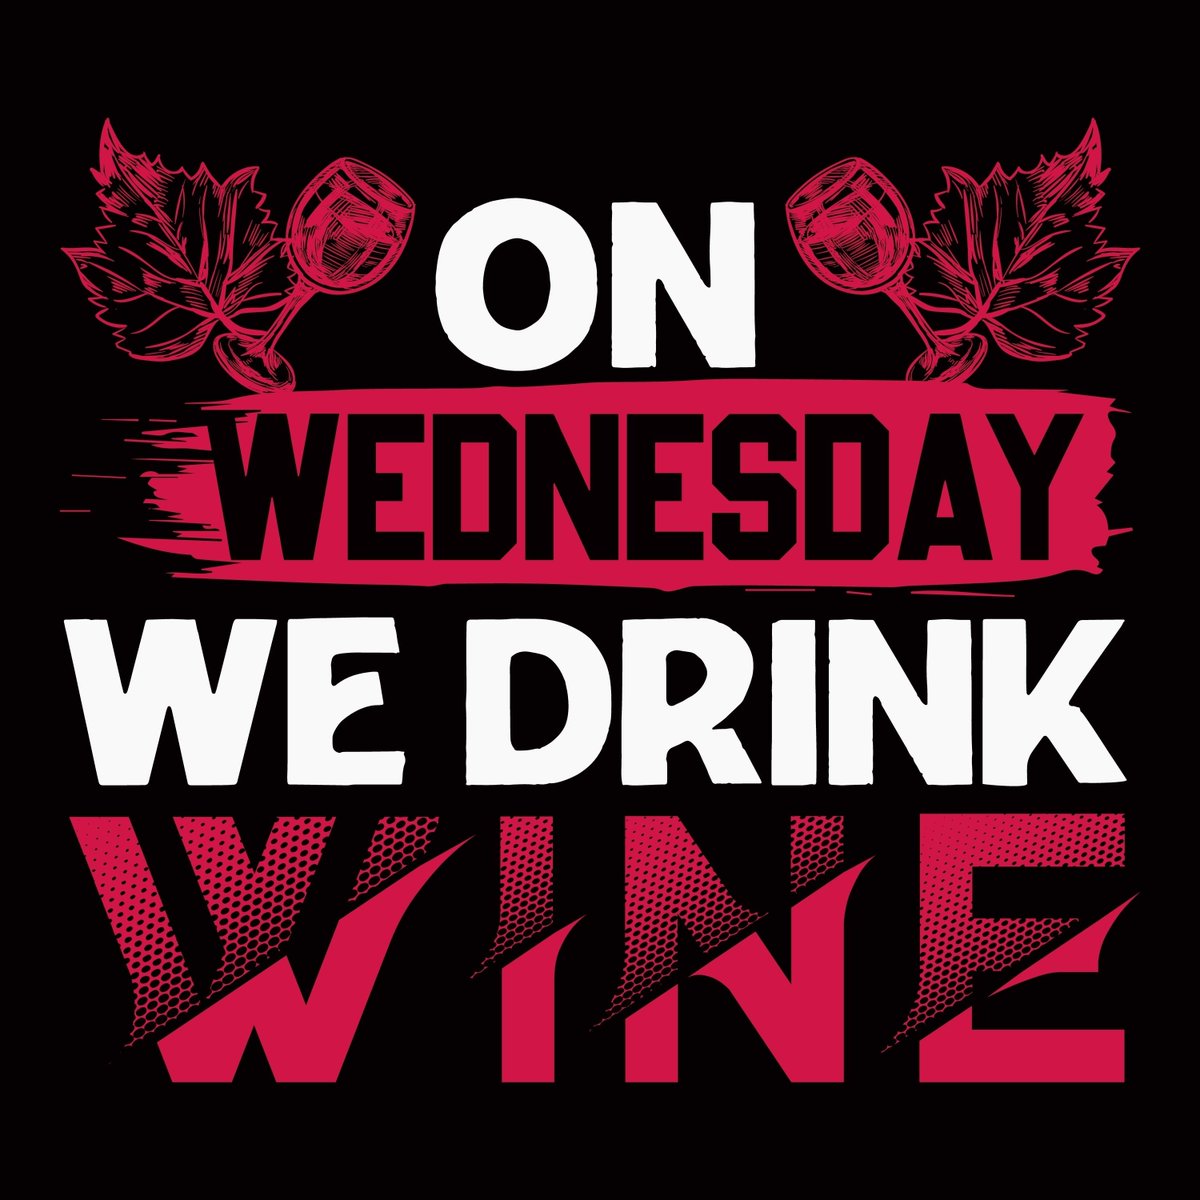 🍷 It's #WineWednesday! Time to wine-down and forget that it's only Wednesday. Pour a glass, because who says the week can't be a little grape? Cheers to surviving halfway! 🥂 #WineHumor #HalfwayThere buff.ly/3o7wJIy